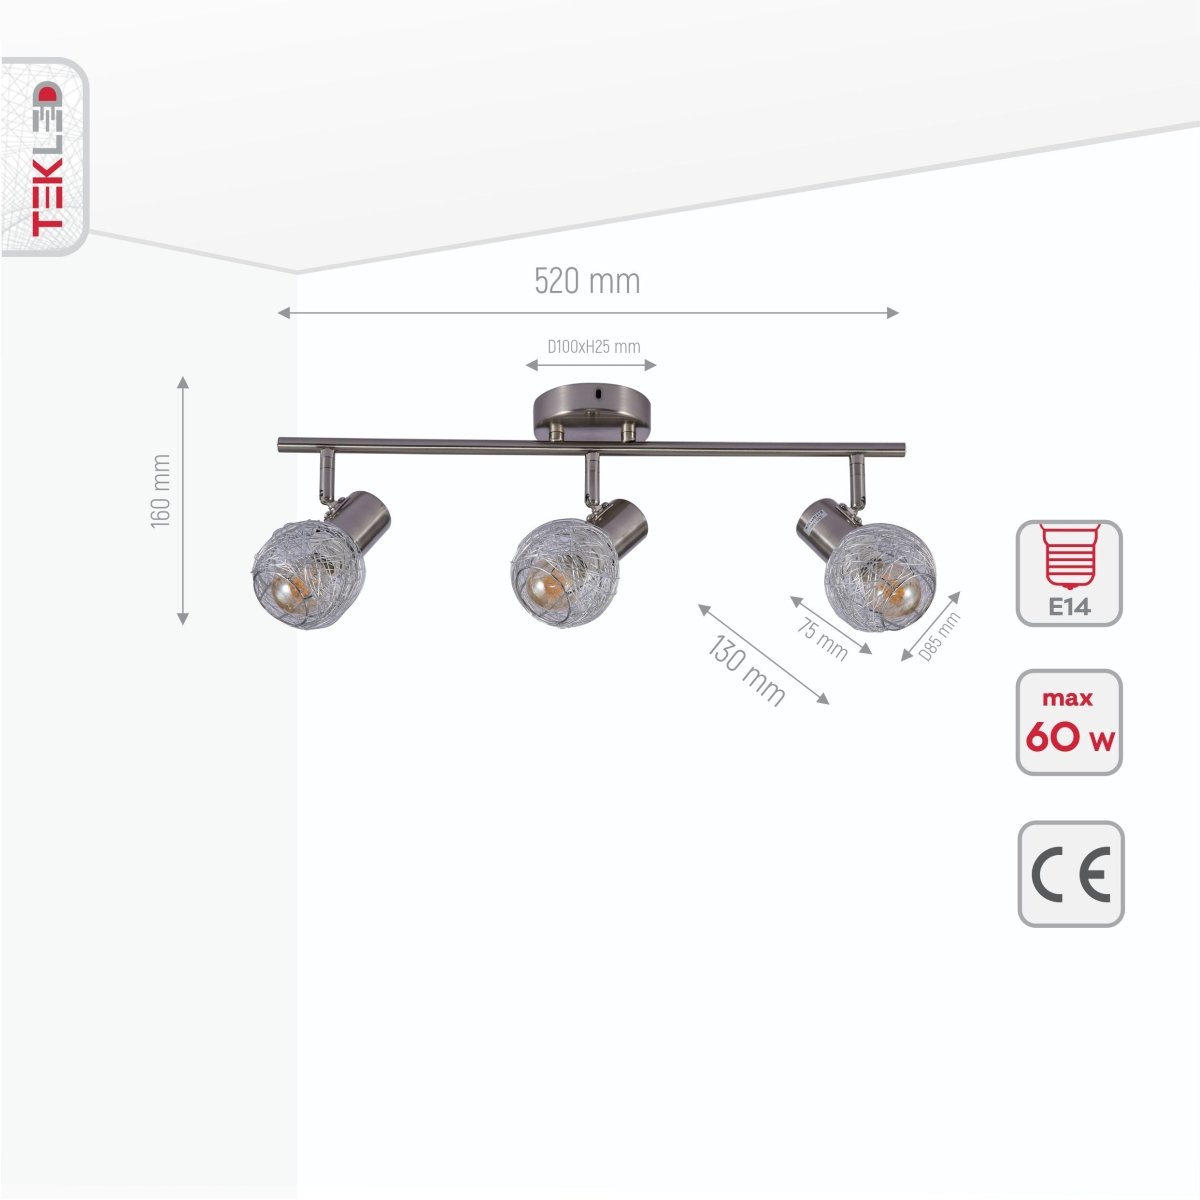 Product dimensions of silver nest matte nickel body semi flush ceiling light 3xe14